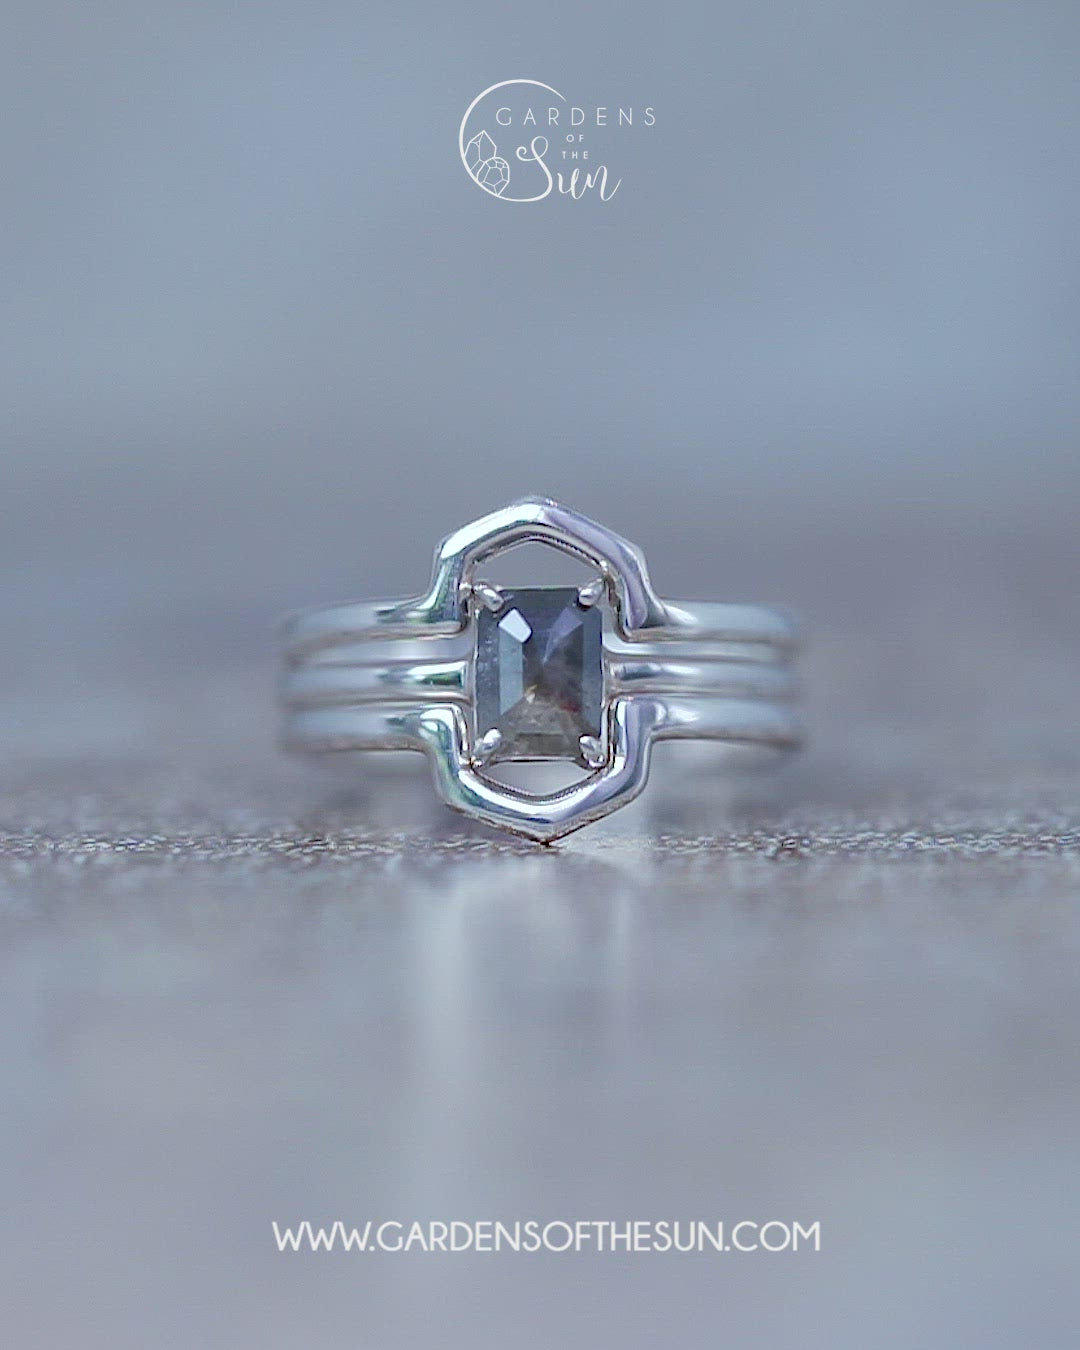 Rose Cut Oval Diamond Ring Set in Silver with Hexagon Bands - Gardens of the Sun | Ethical Jewelry